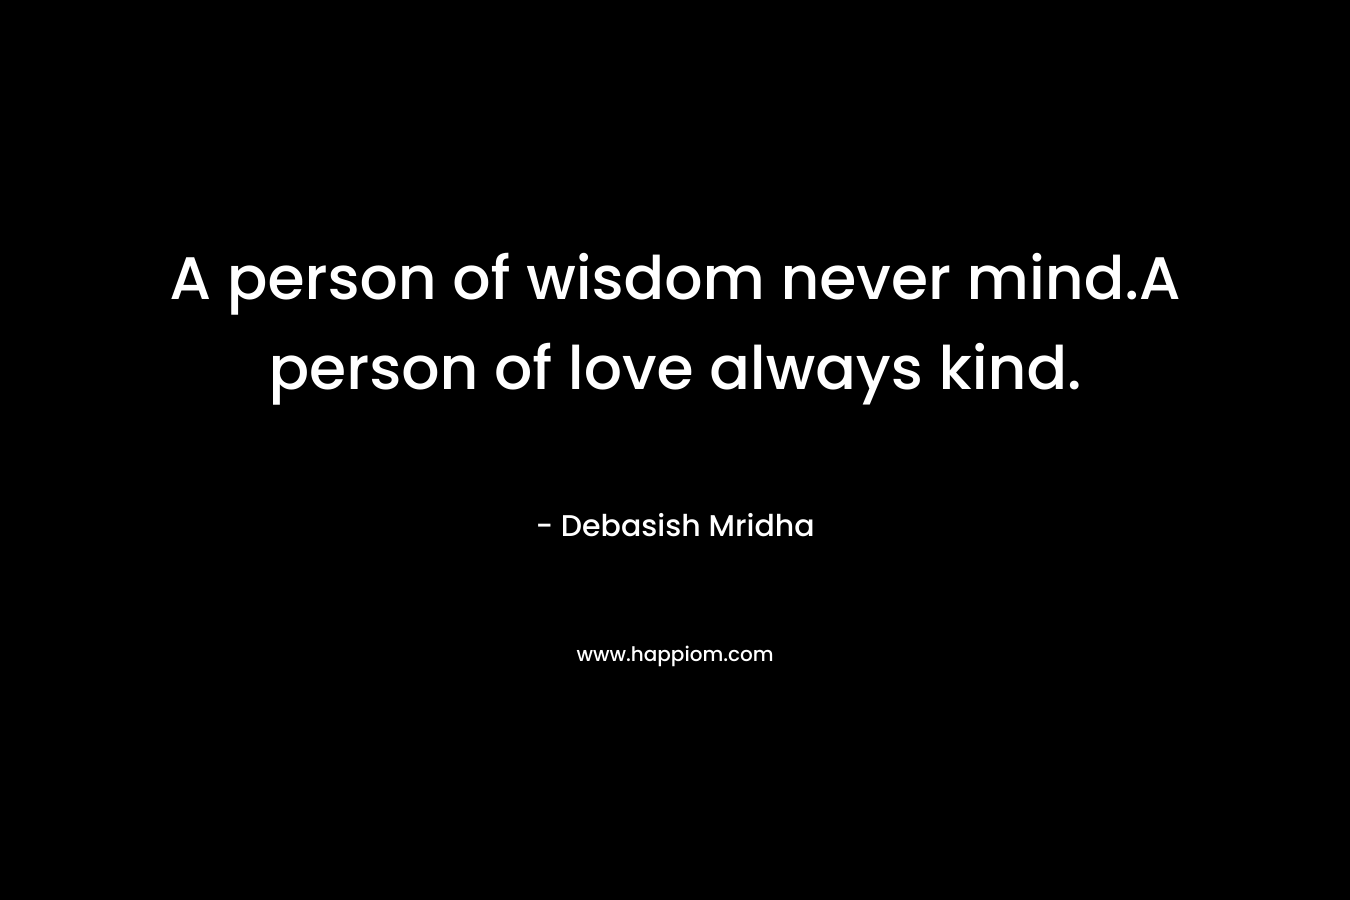 A person of wisdom never mind.A person of love always kind.